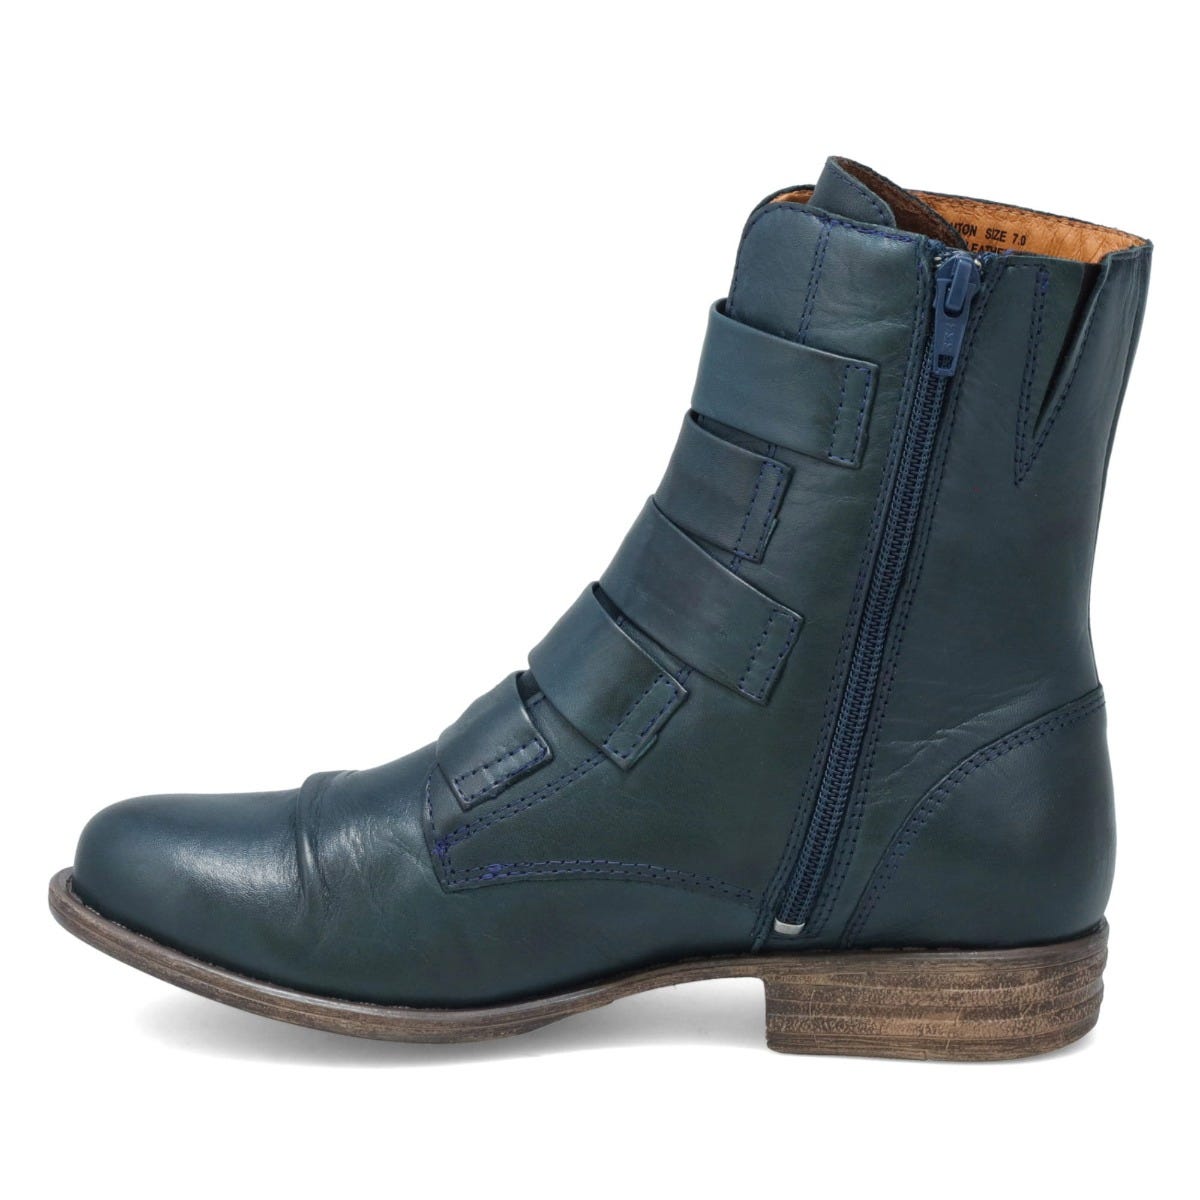 Inner view of the miz mooz leighton boot. This boot is ocean (dark blue) colored. It is slightly taller than ankle height and has decorative straps all along the front.